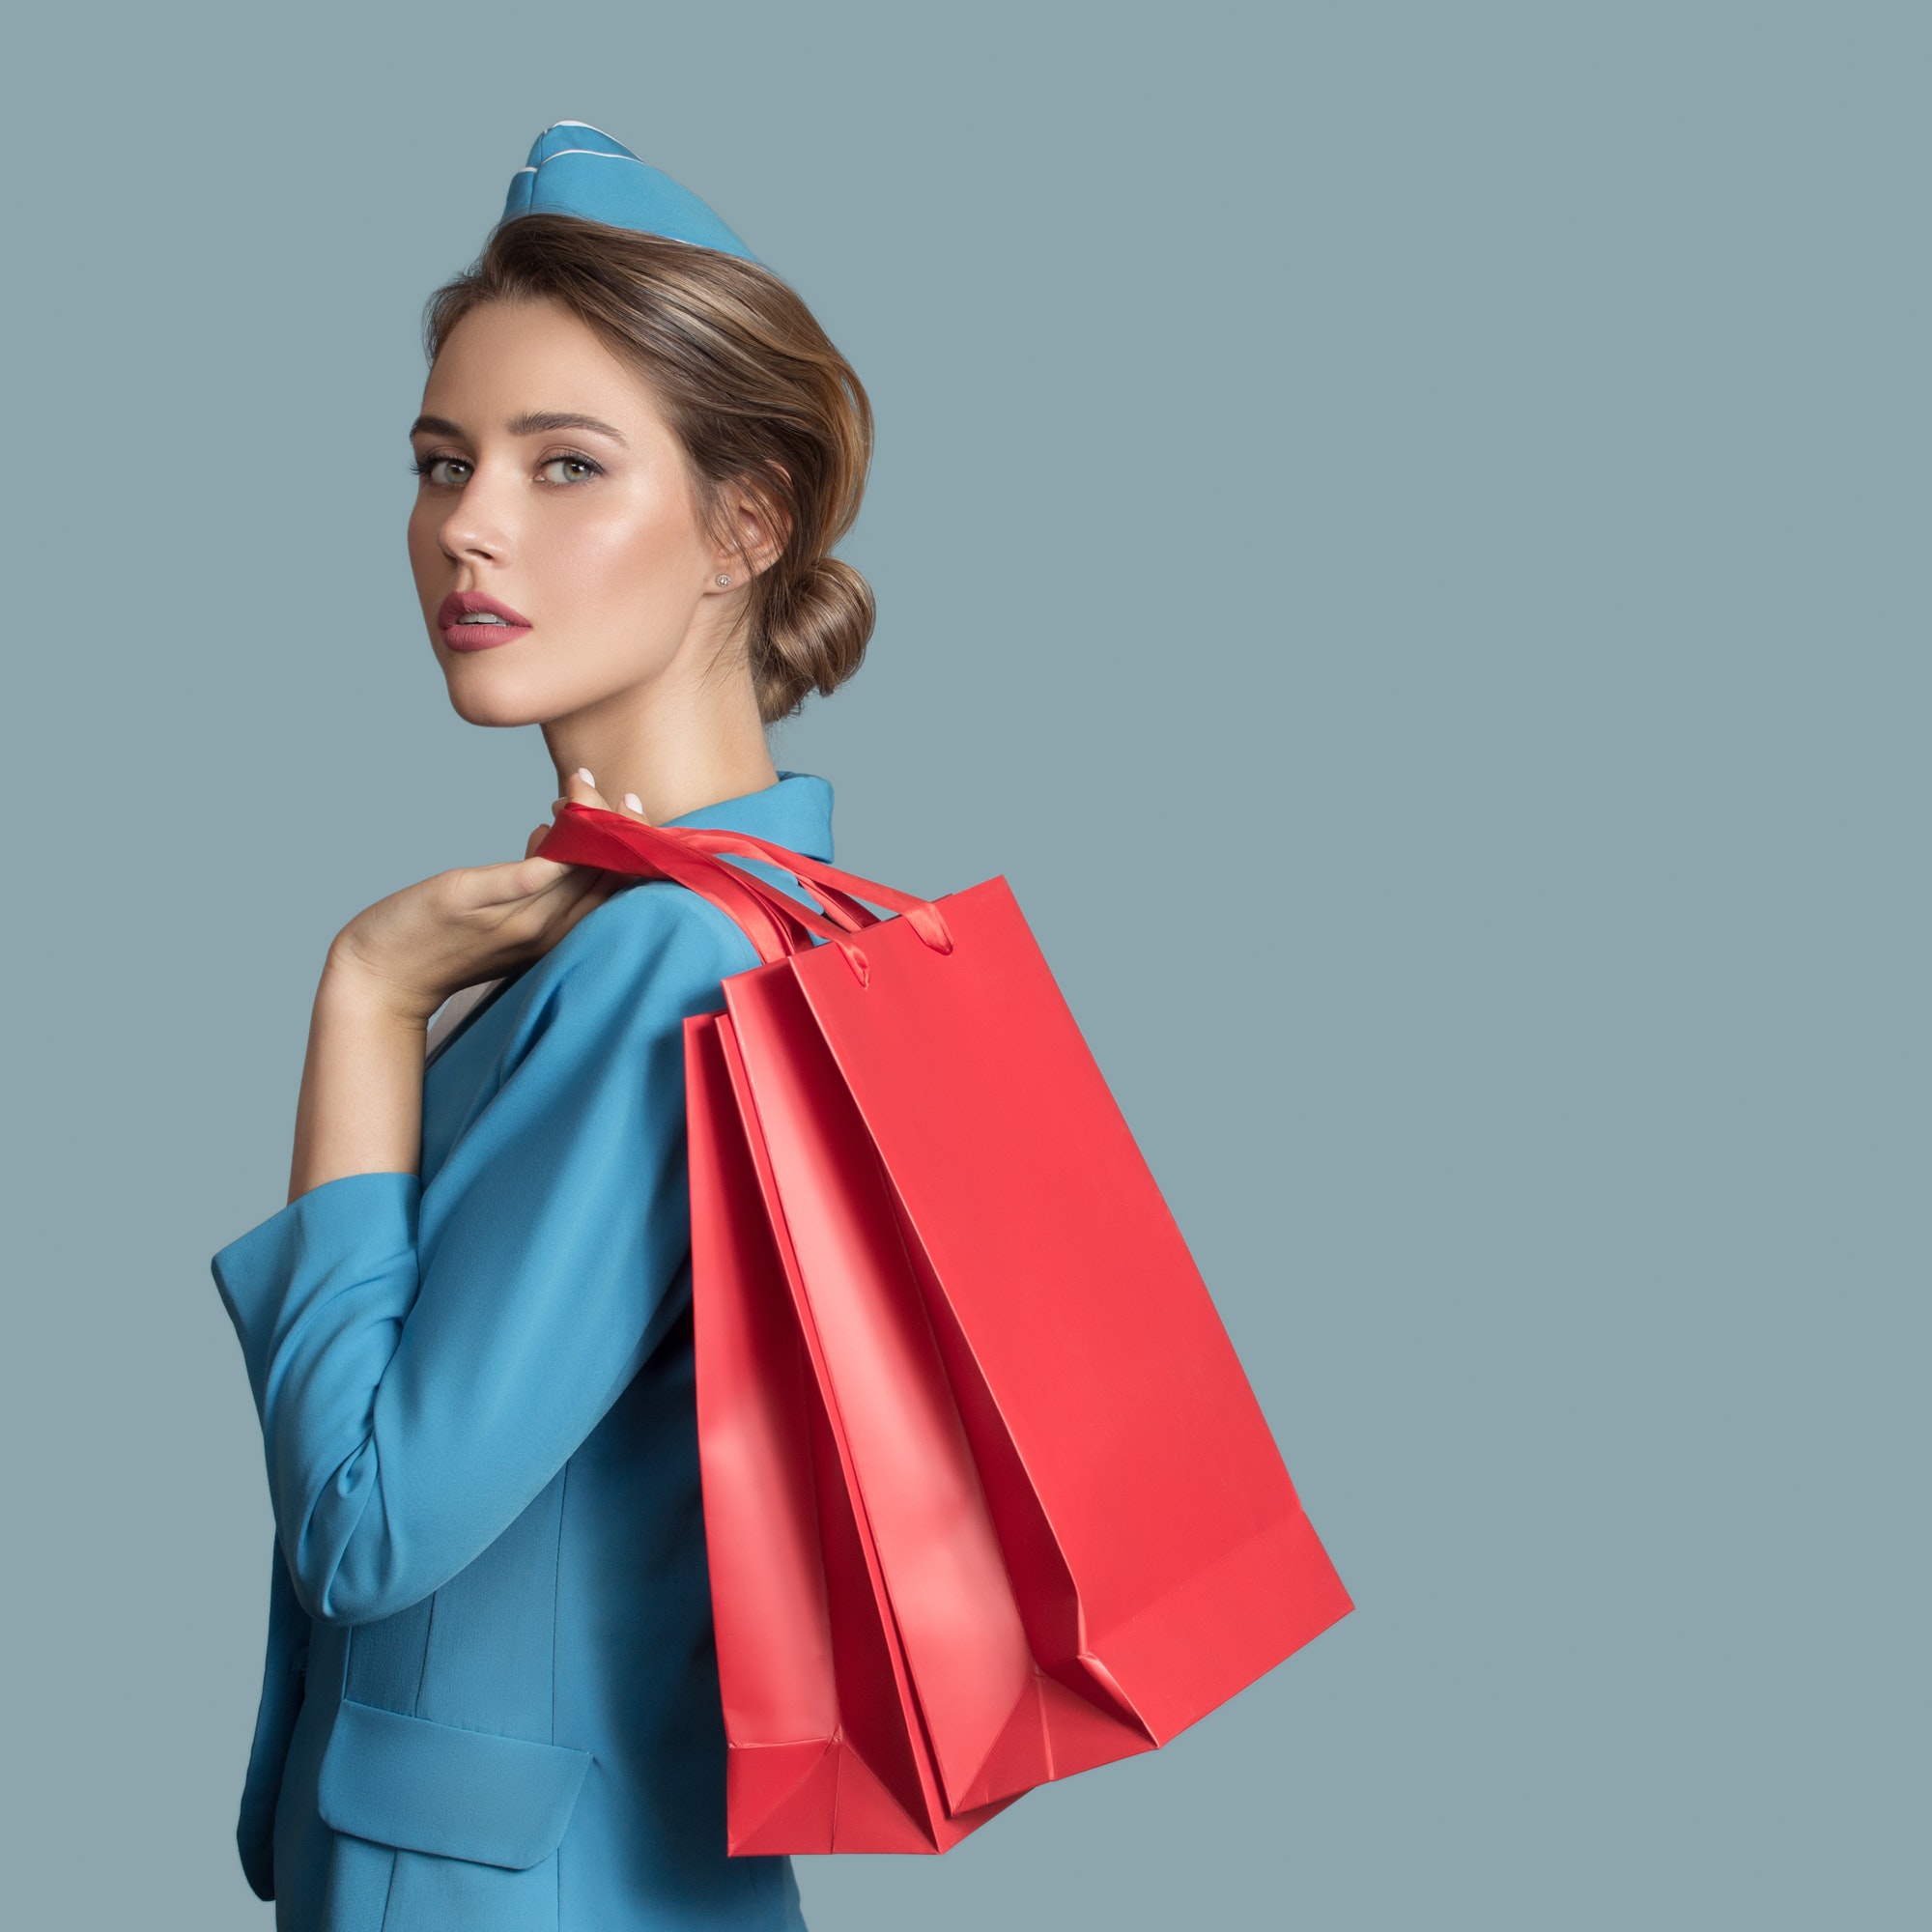 Attractive Stewardess Holding Red Shopping Bags. Duty Free.